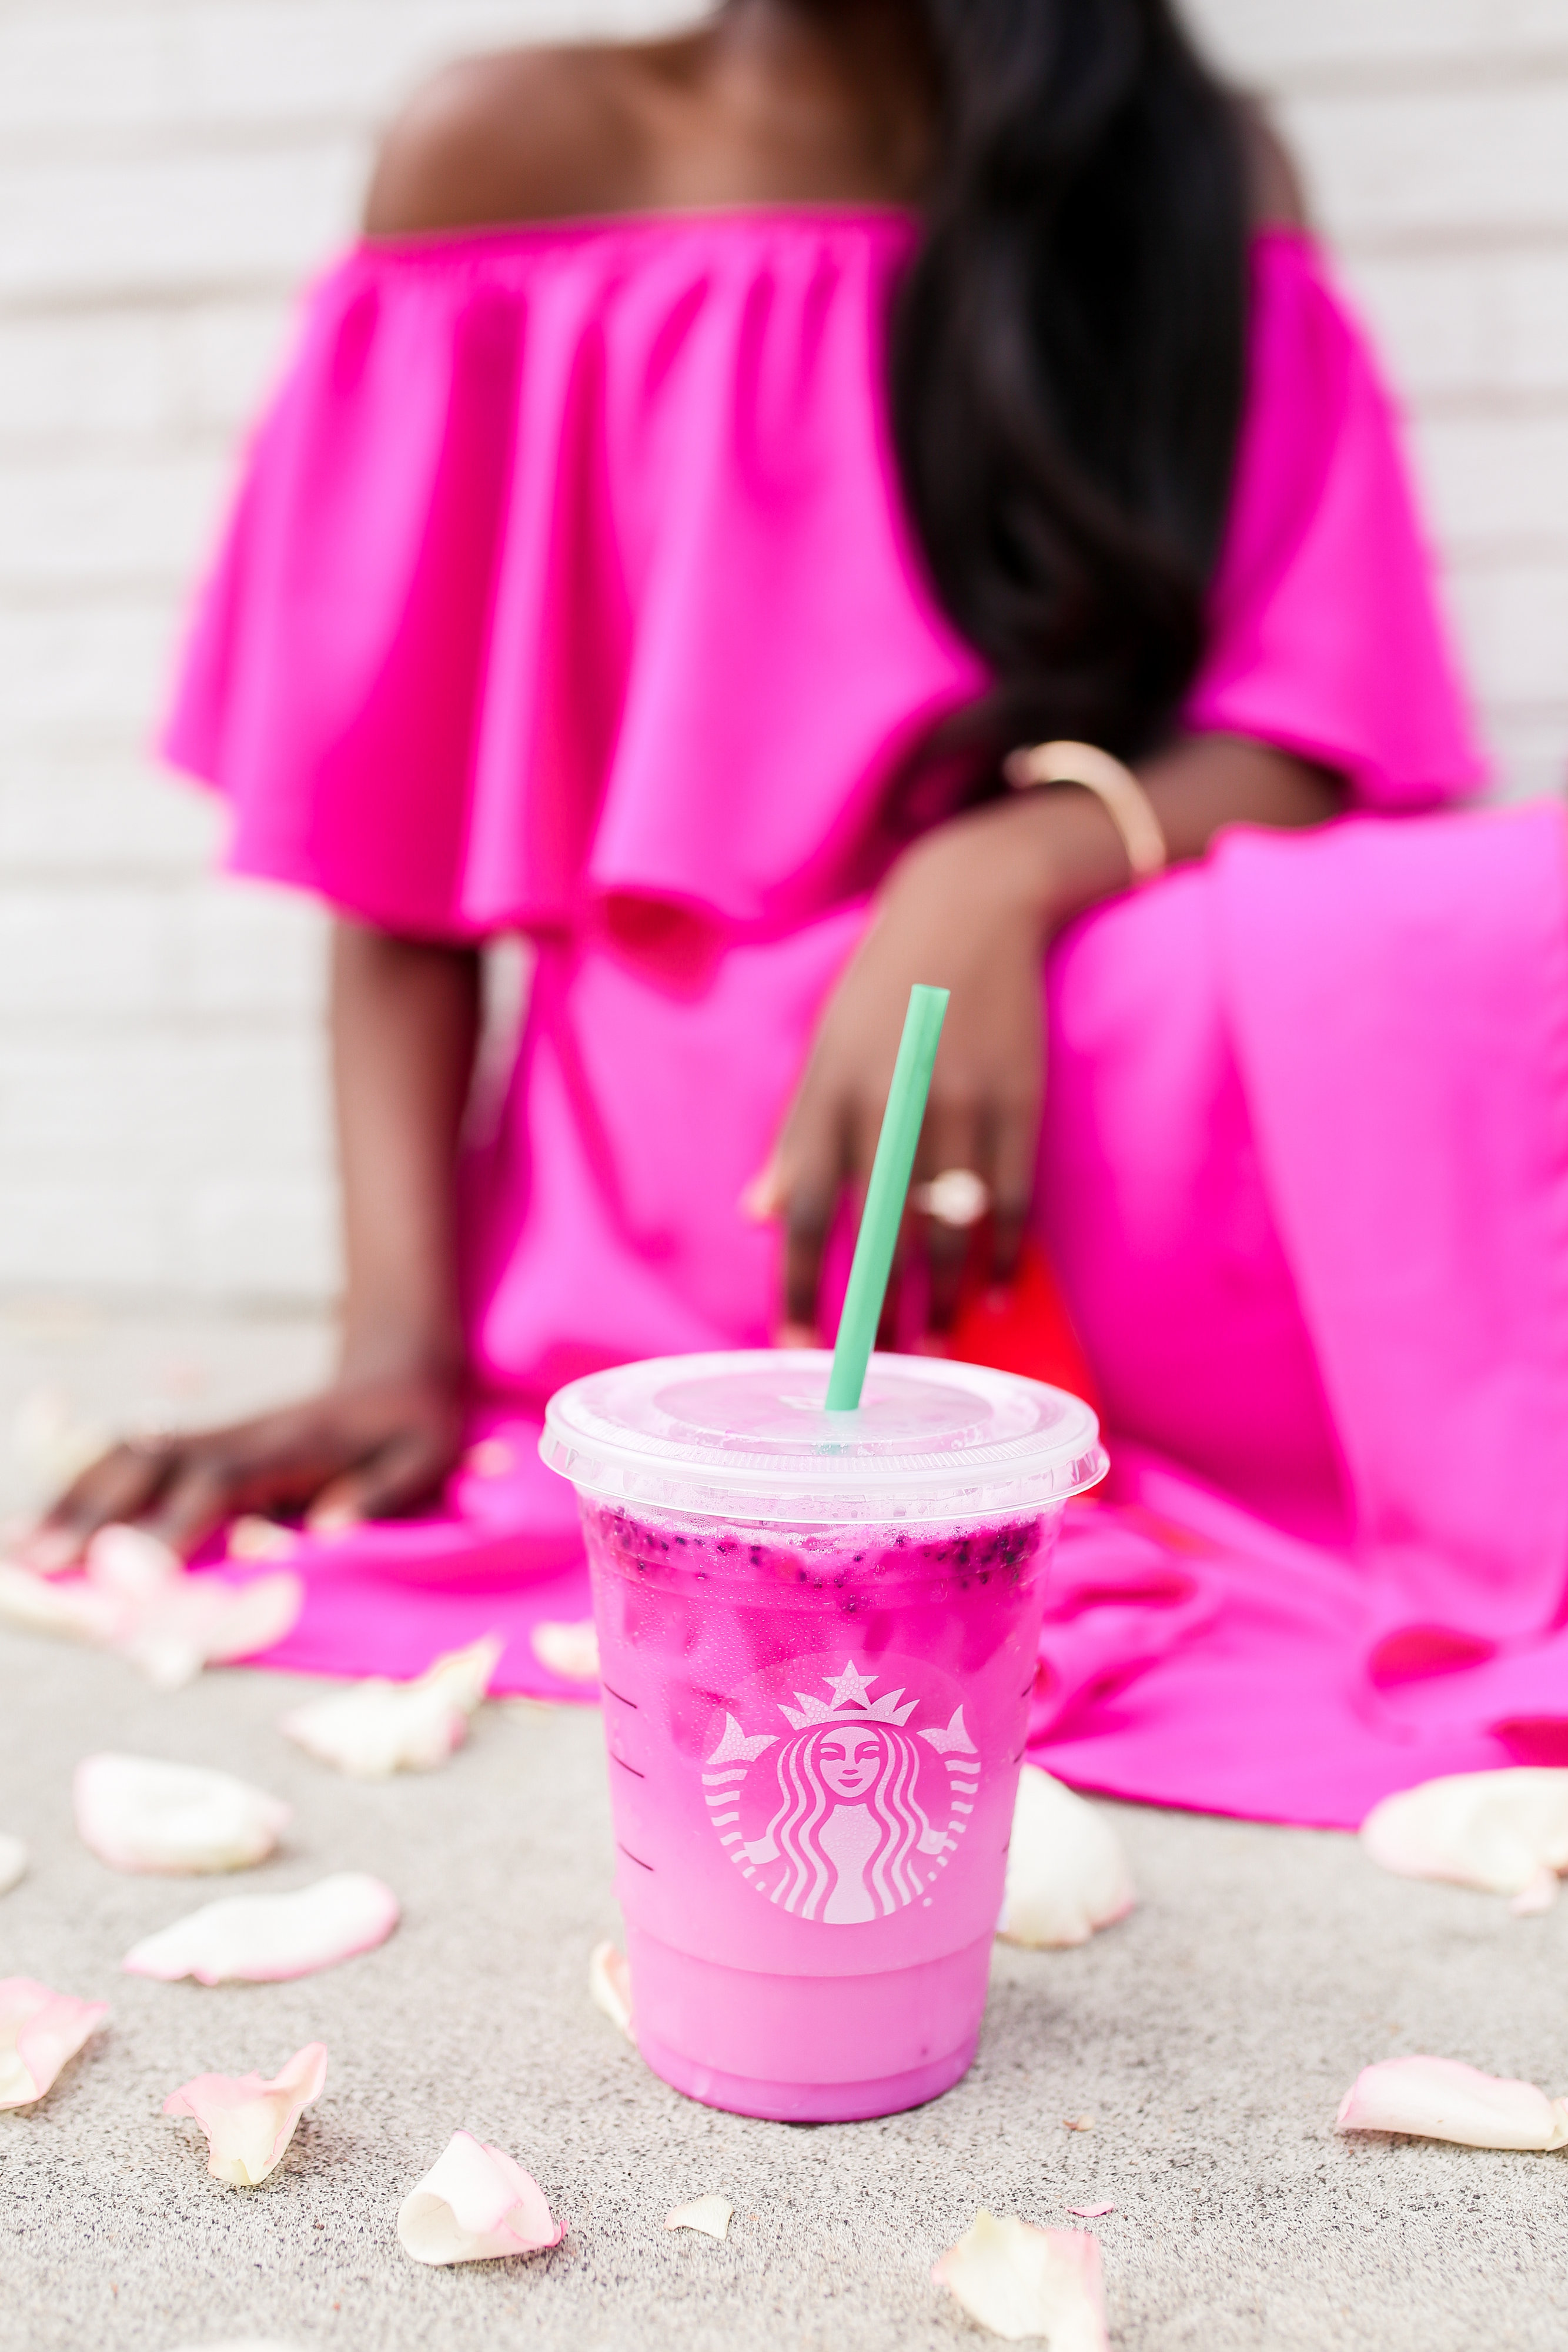 Starbucks Dragon Drink is the new pink drink of the season #dragonfruitinspired